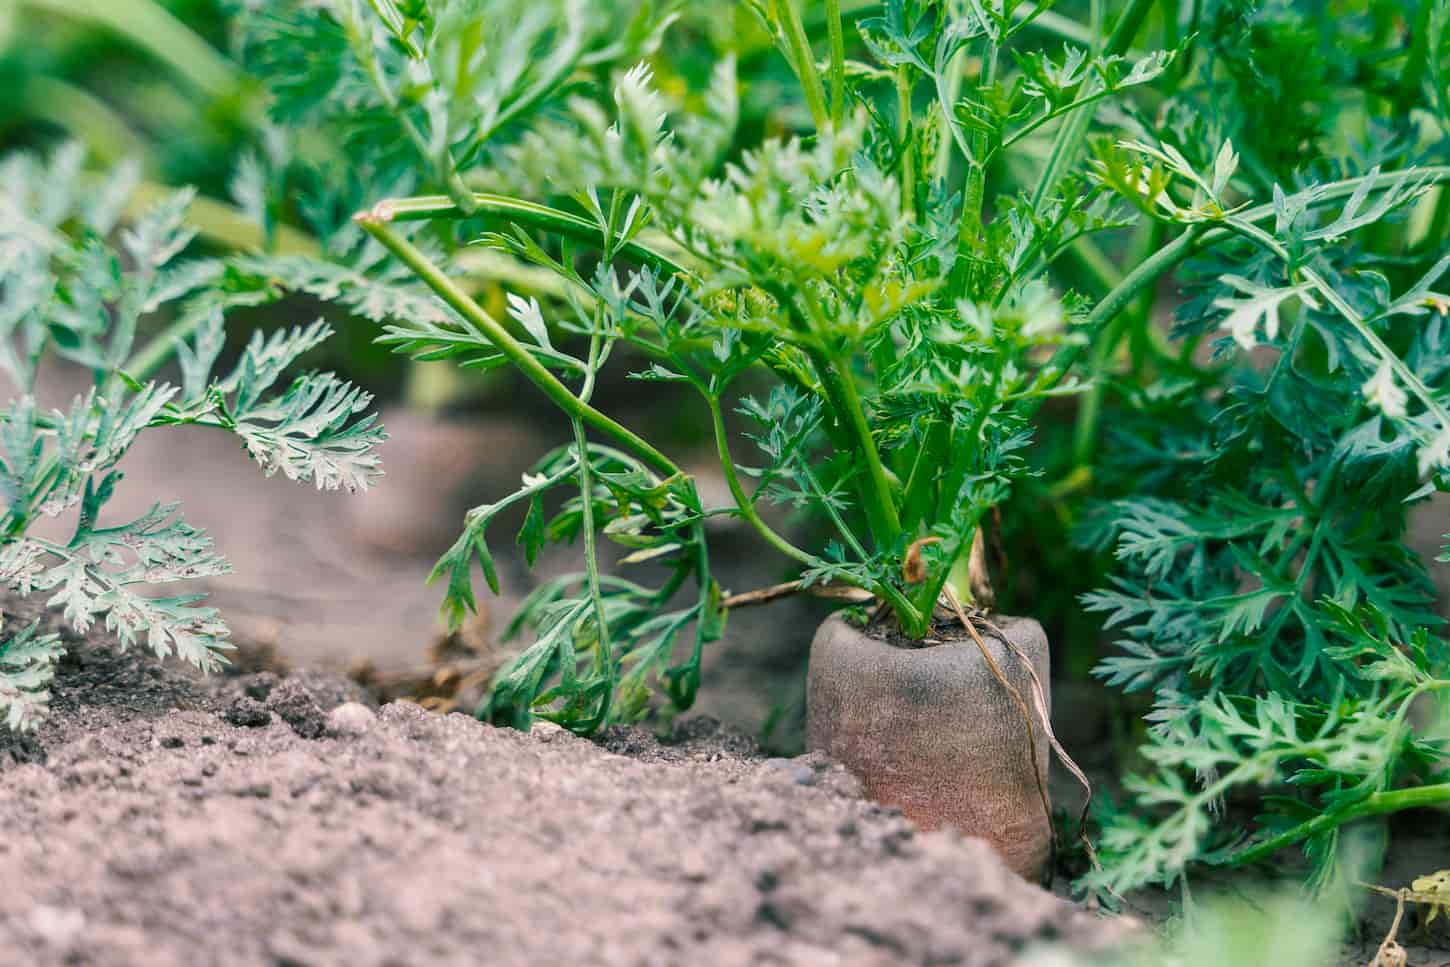 An image of a carrot vegetable grows in the garden in the soil organic background.